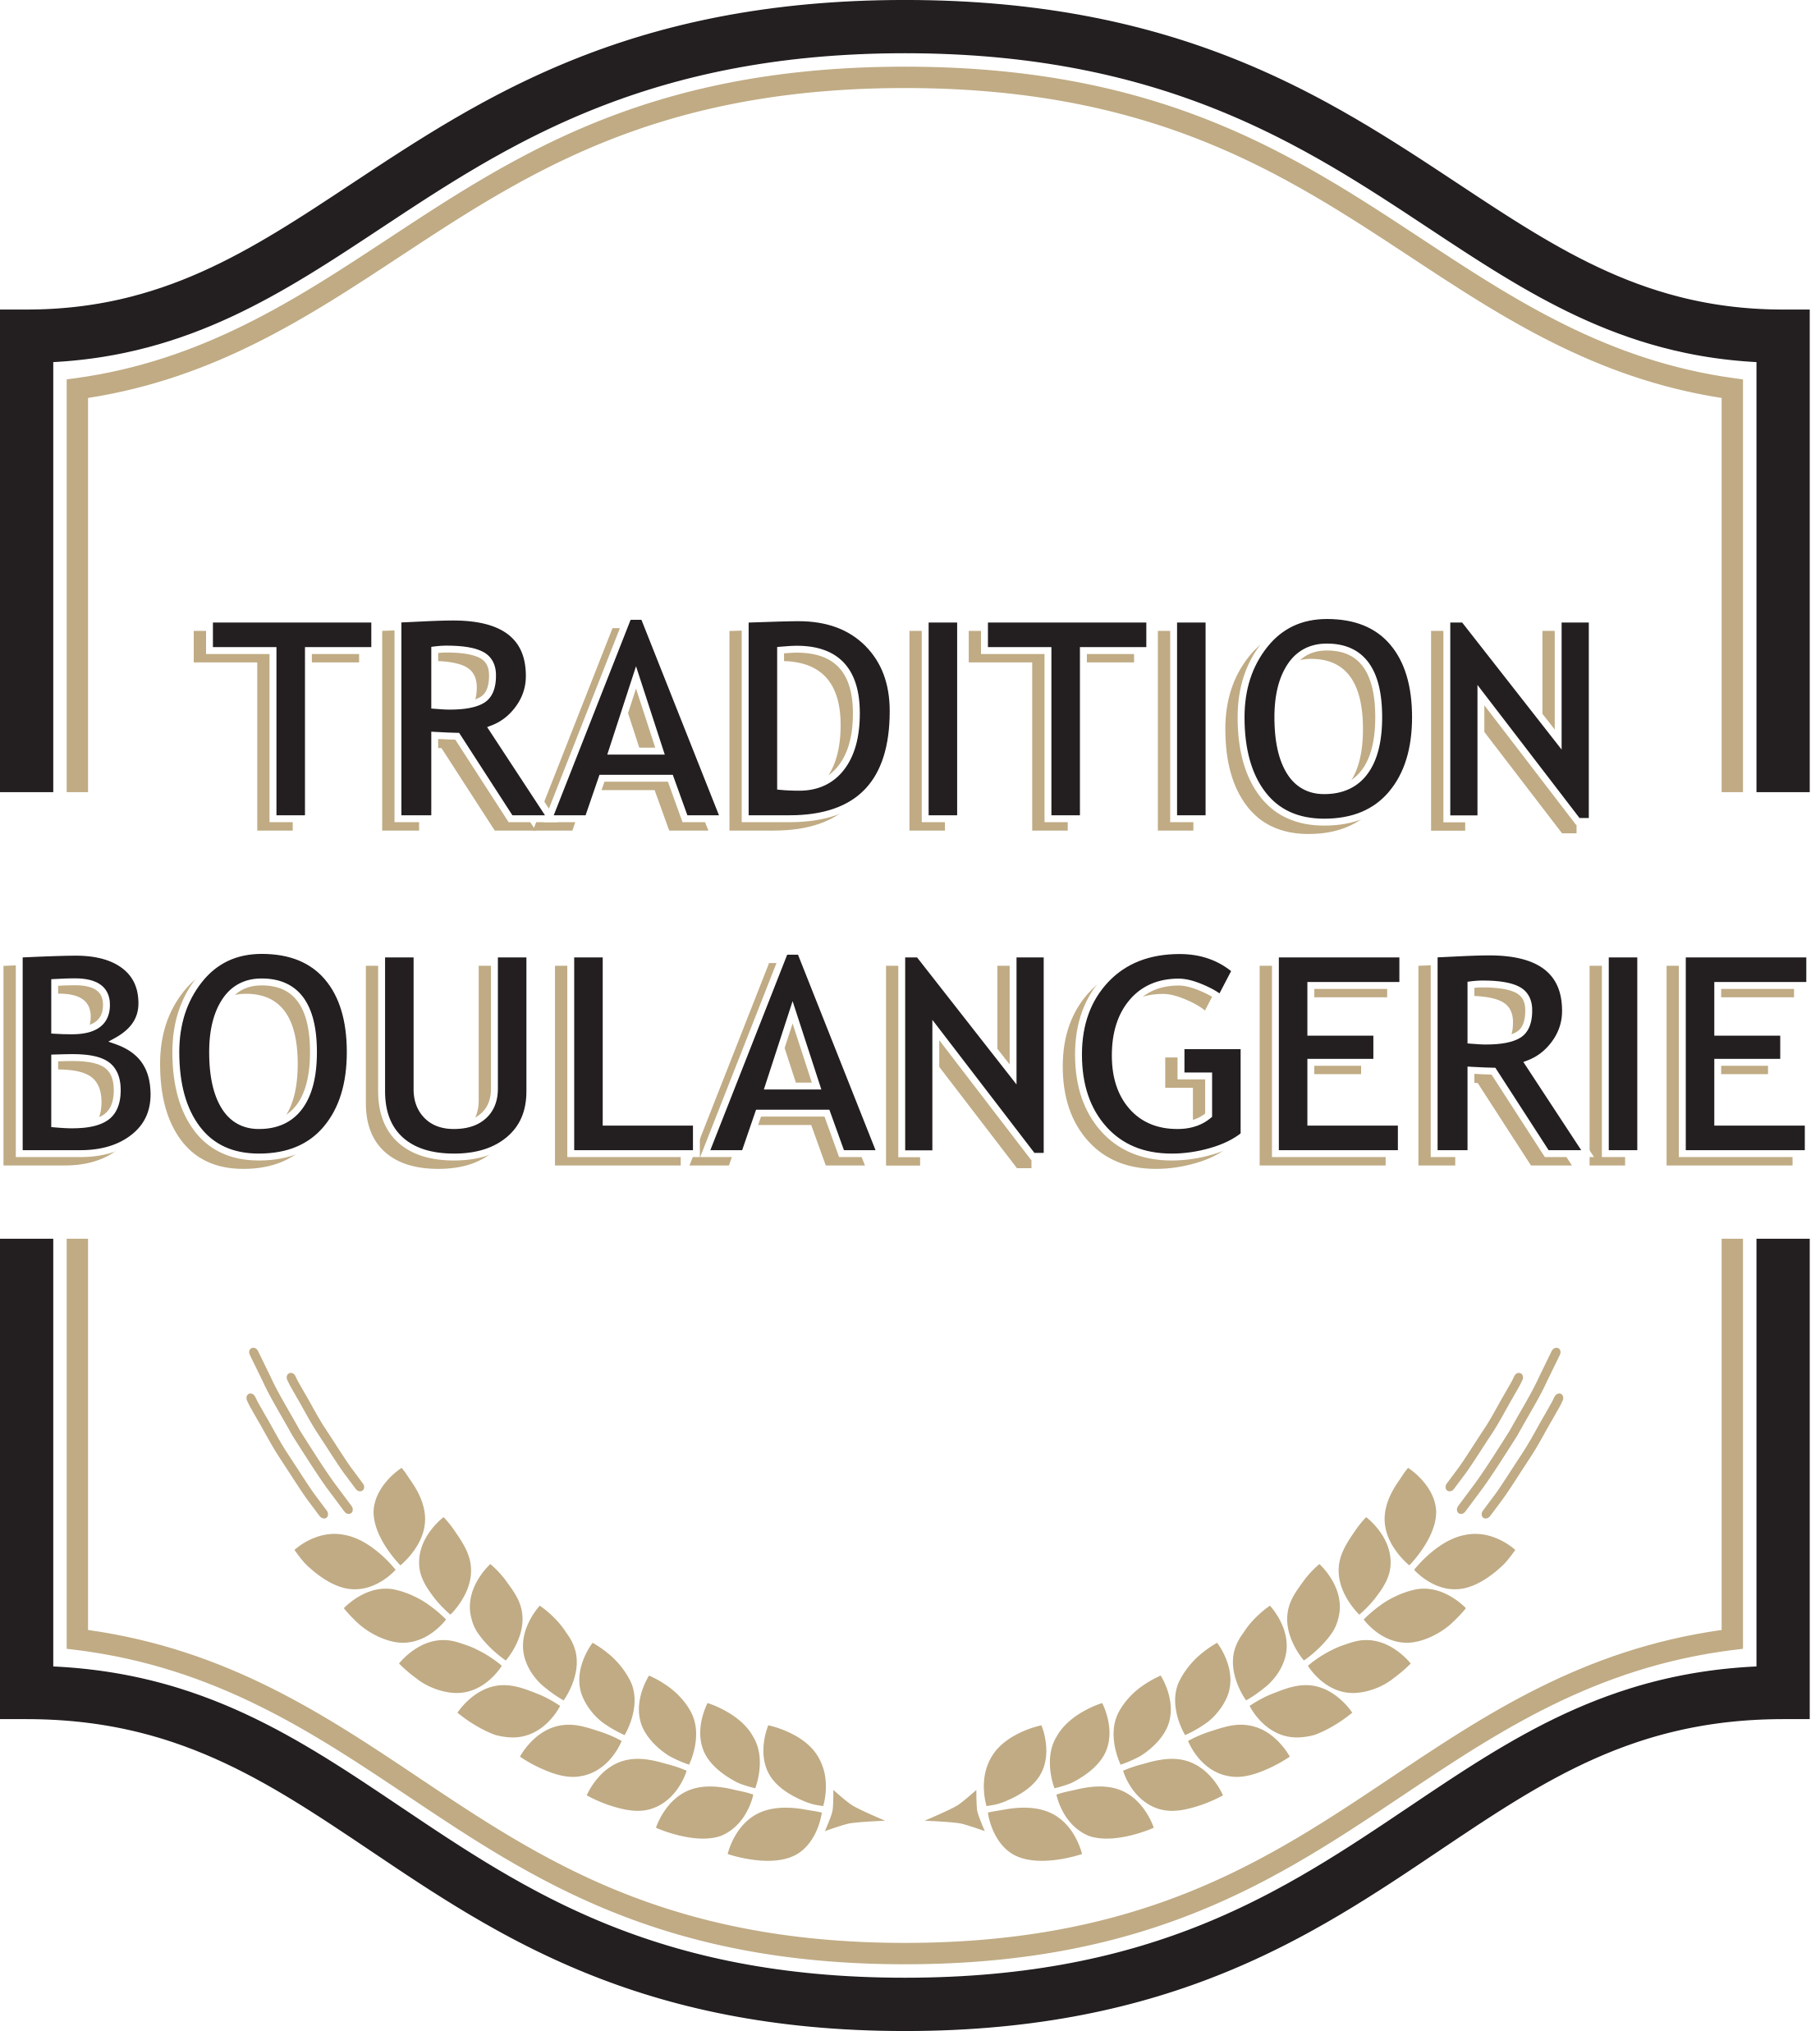 Tradition Boulangerie